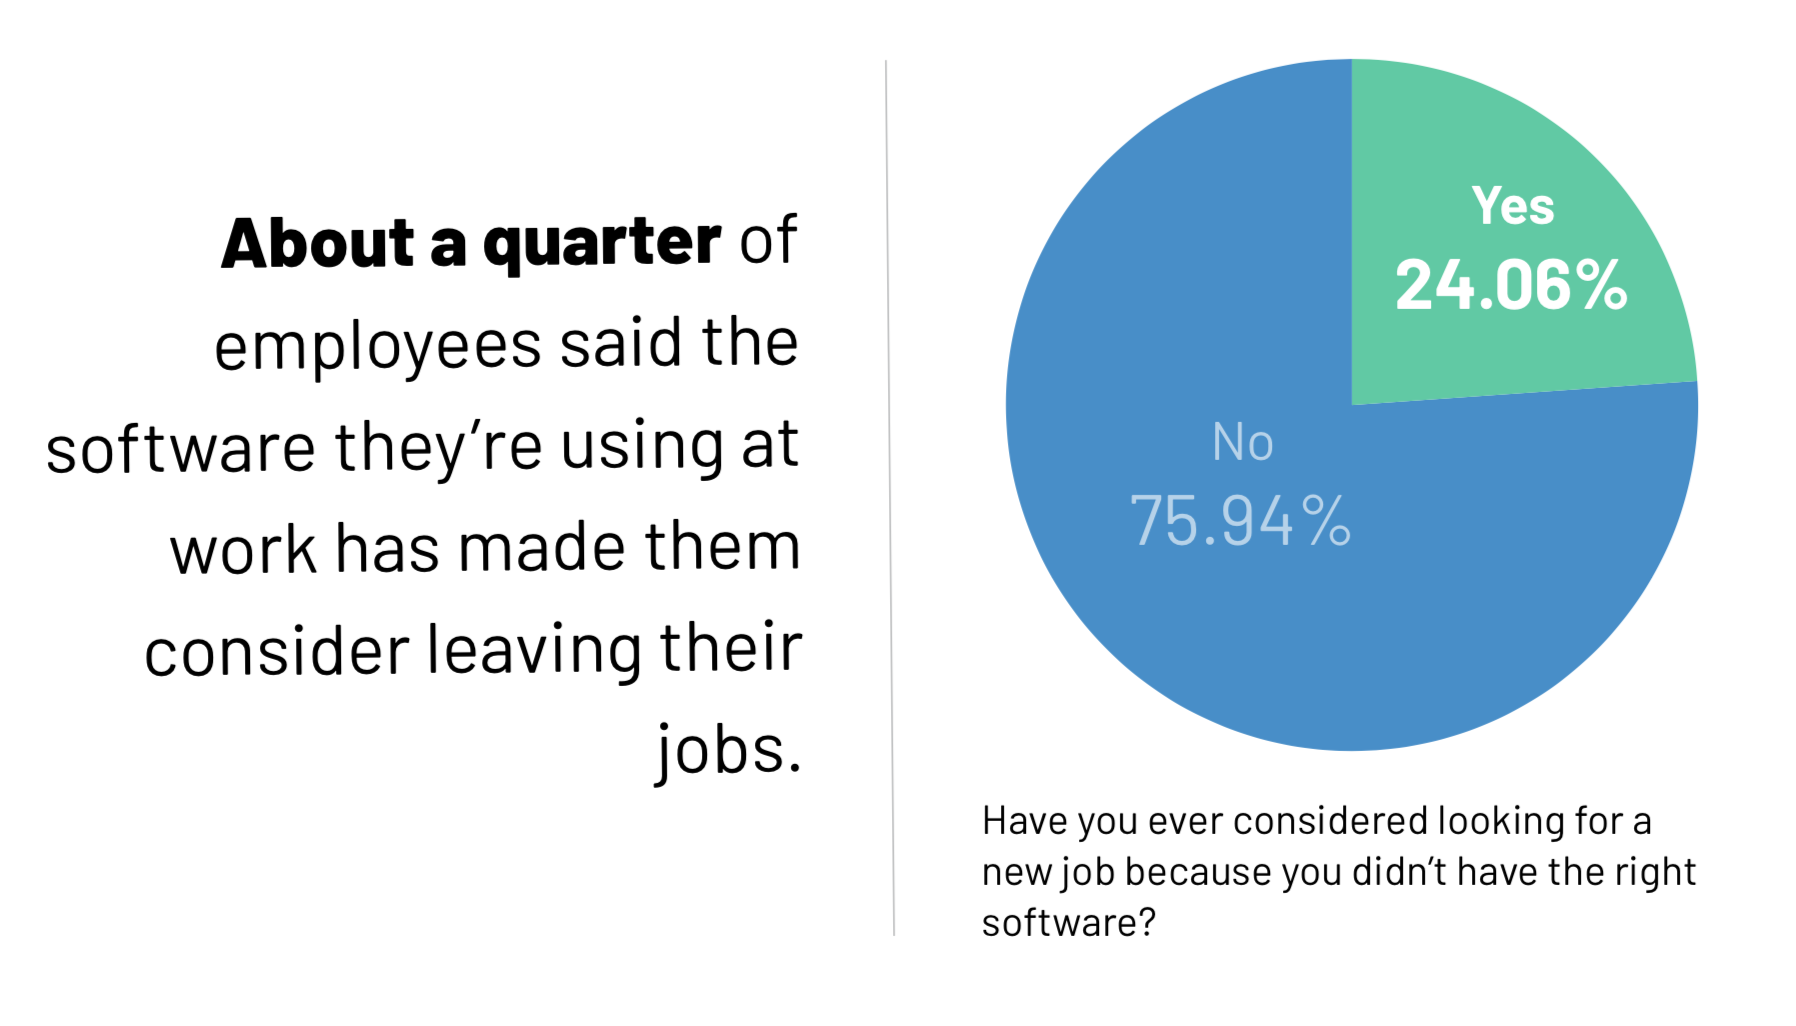 The wrong software can make employees consider leaving their jobs